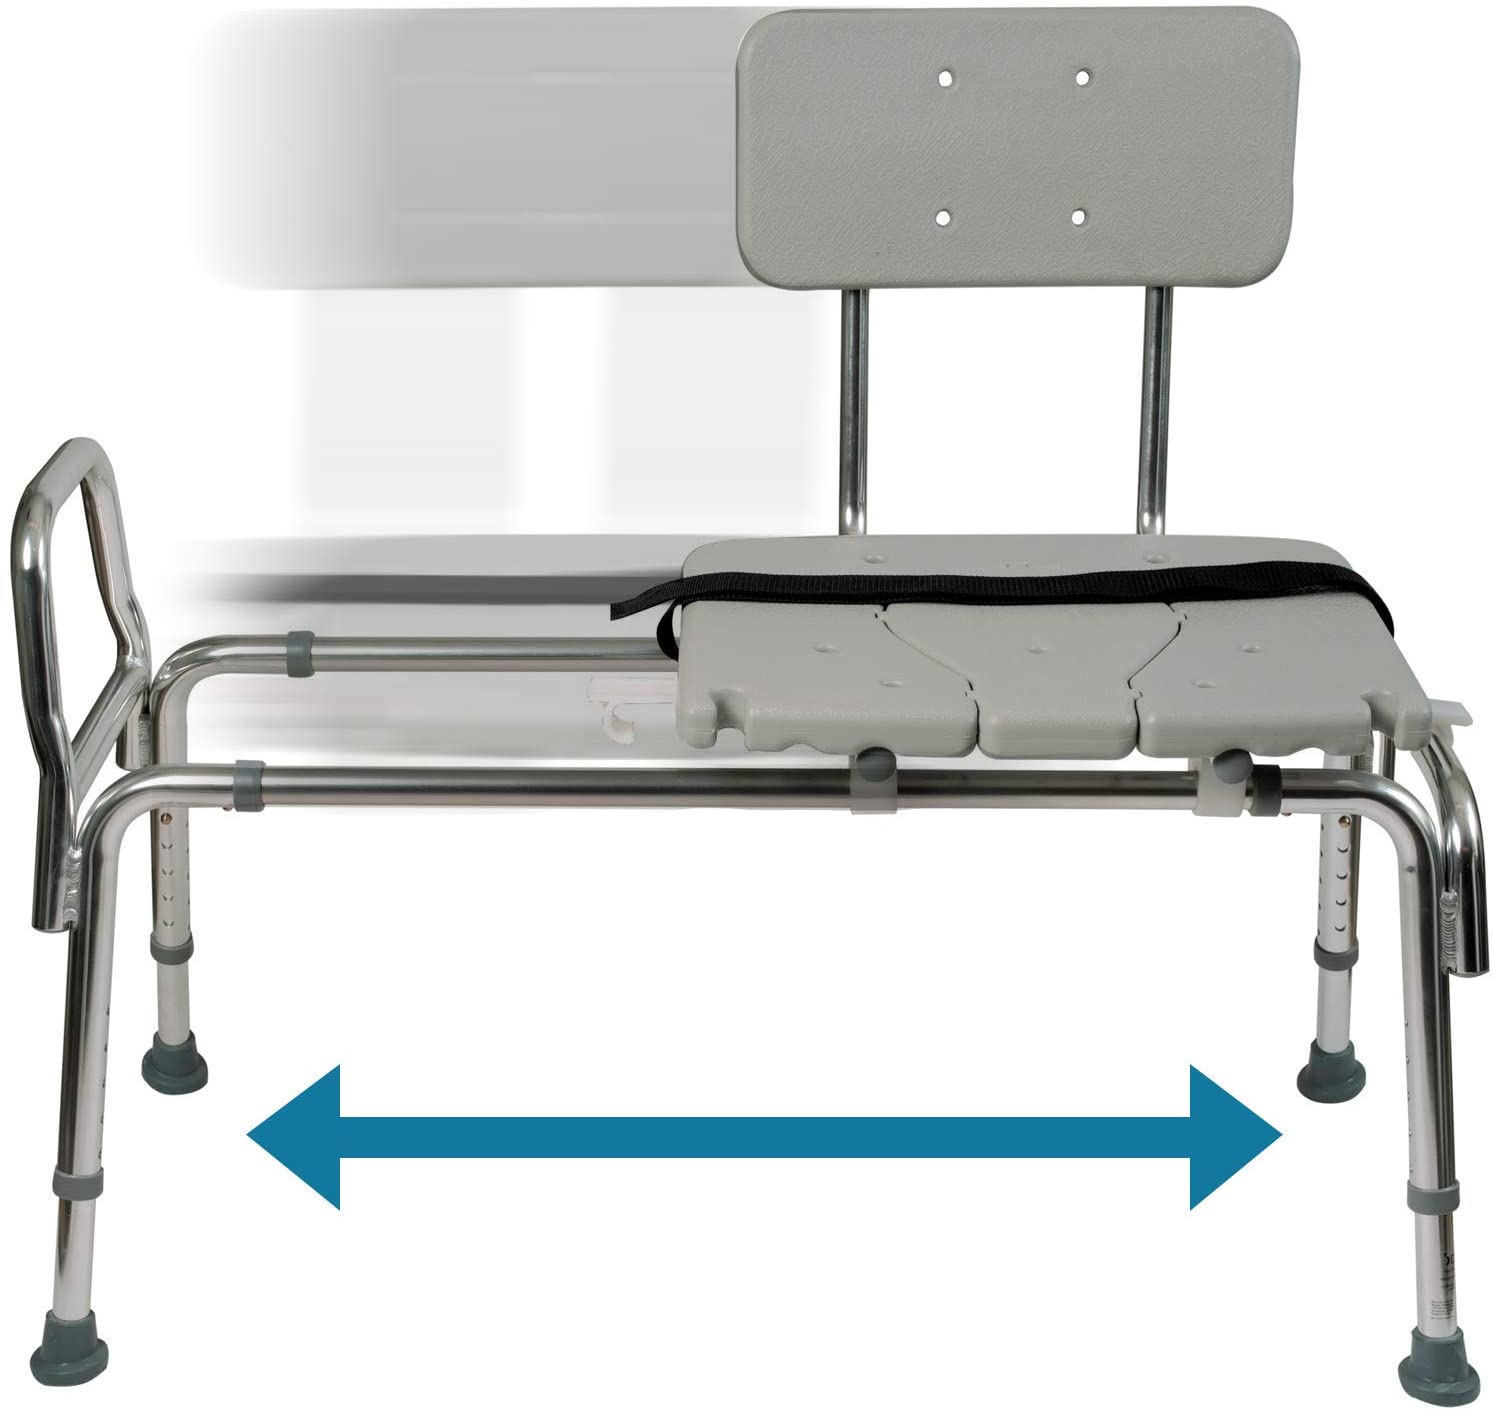 Durable Medical Equipment Shower Bench, wide and with sliding track (weight capacity up to 400lbs)